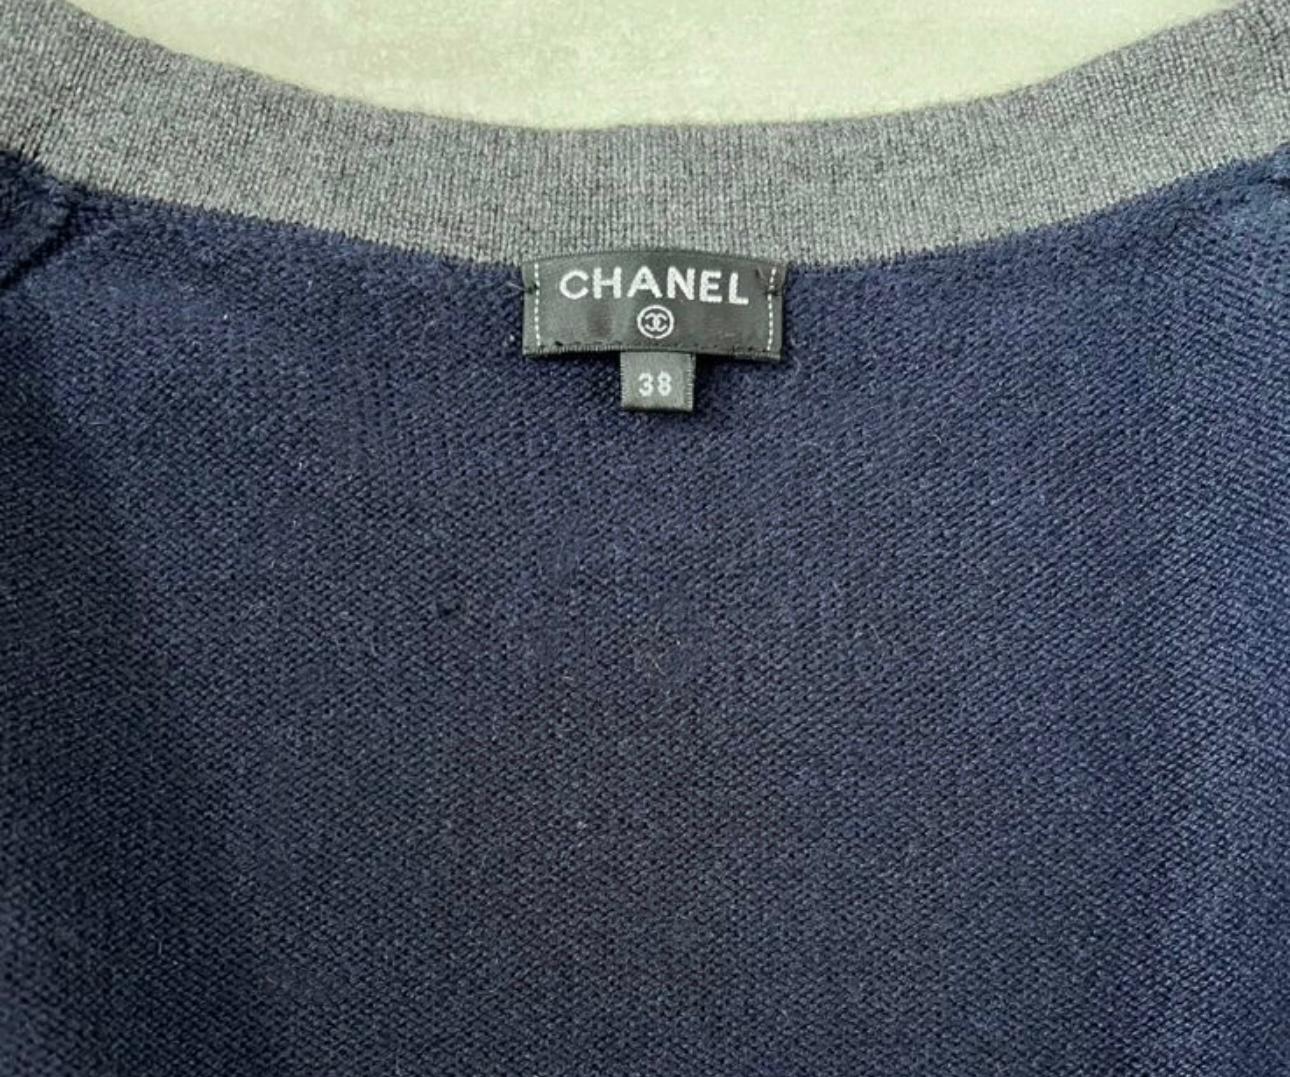 Chanel Sophia Coppola Style New Cashmere Suit For Sale 4